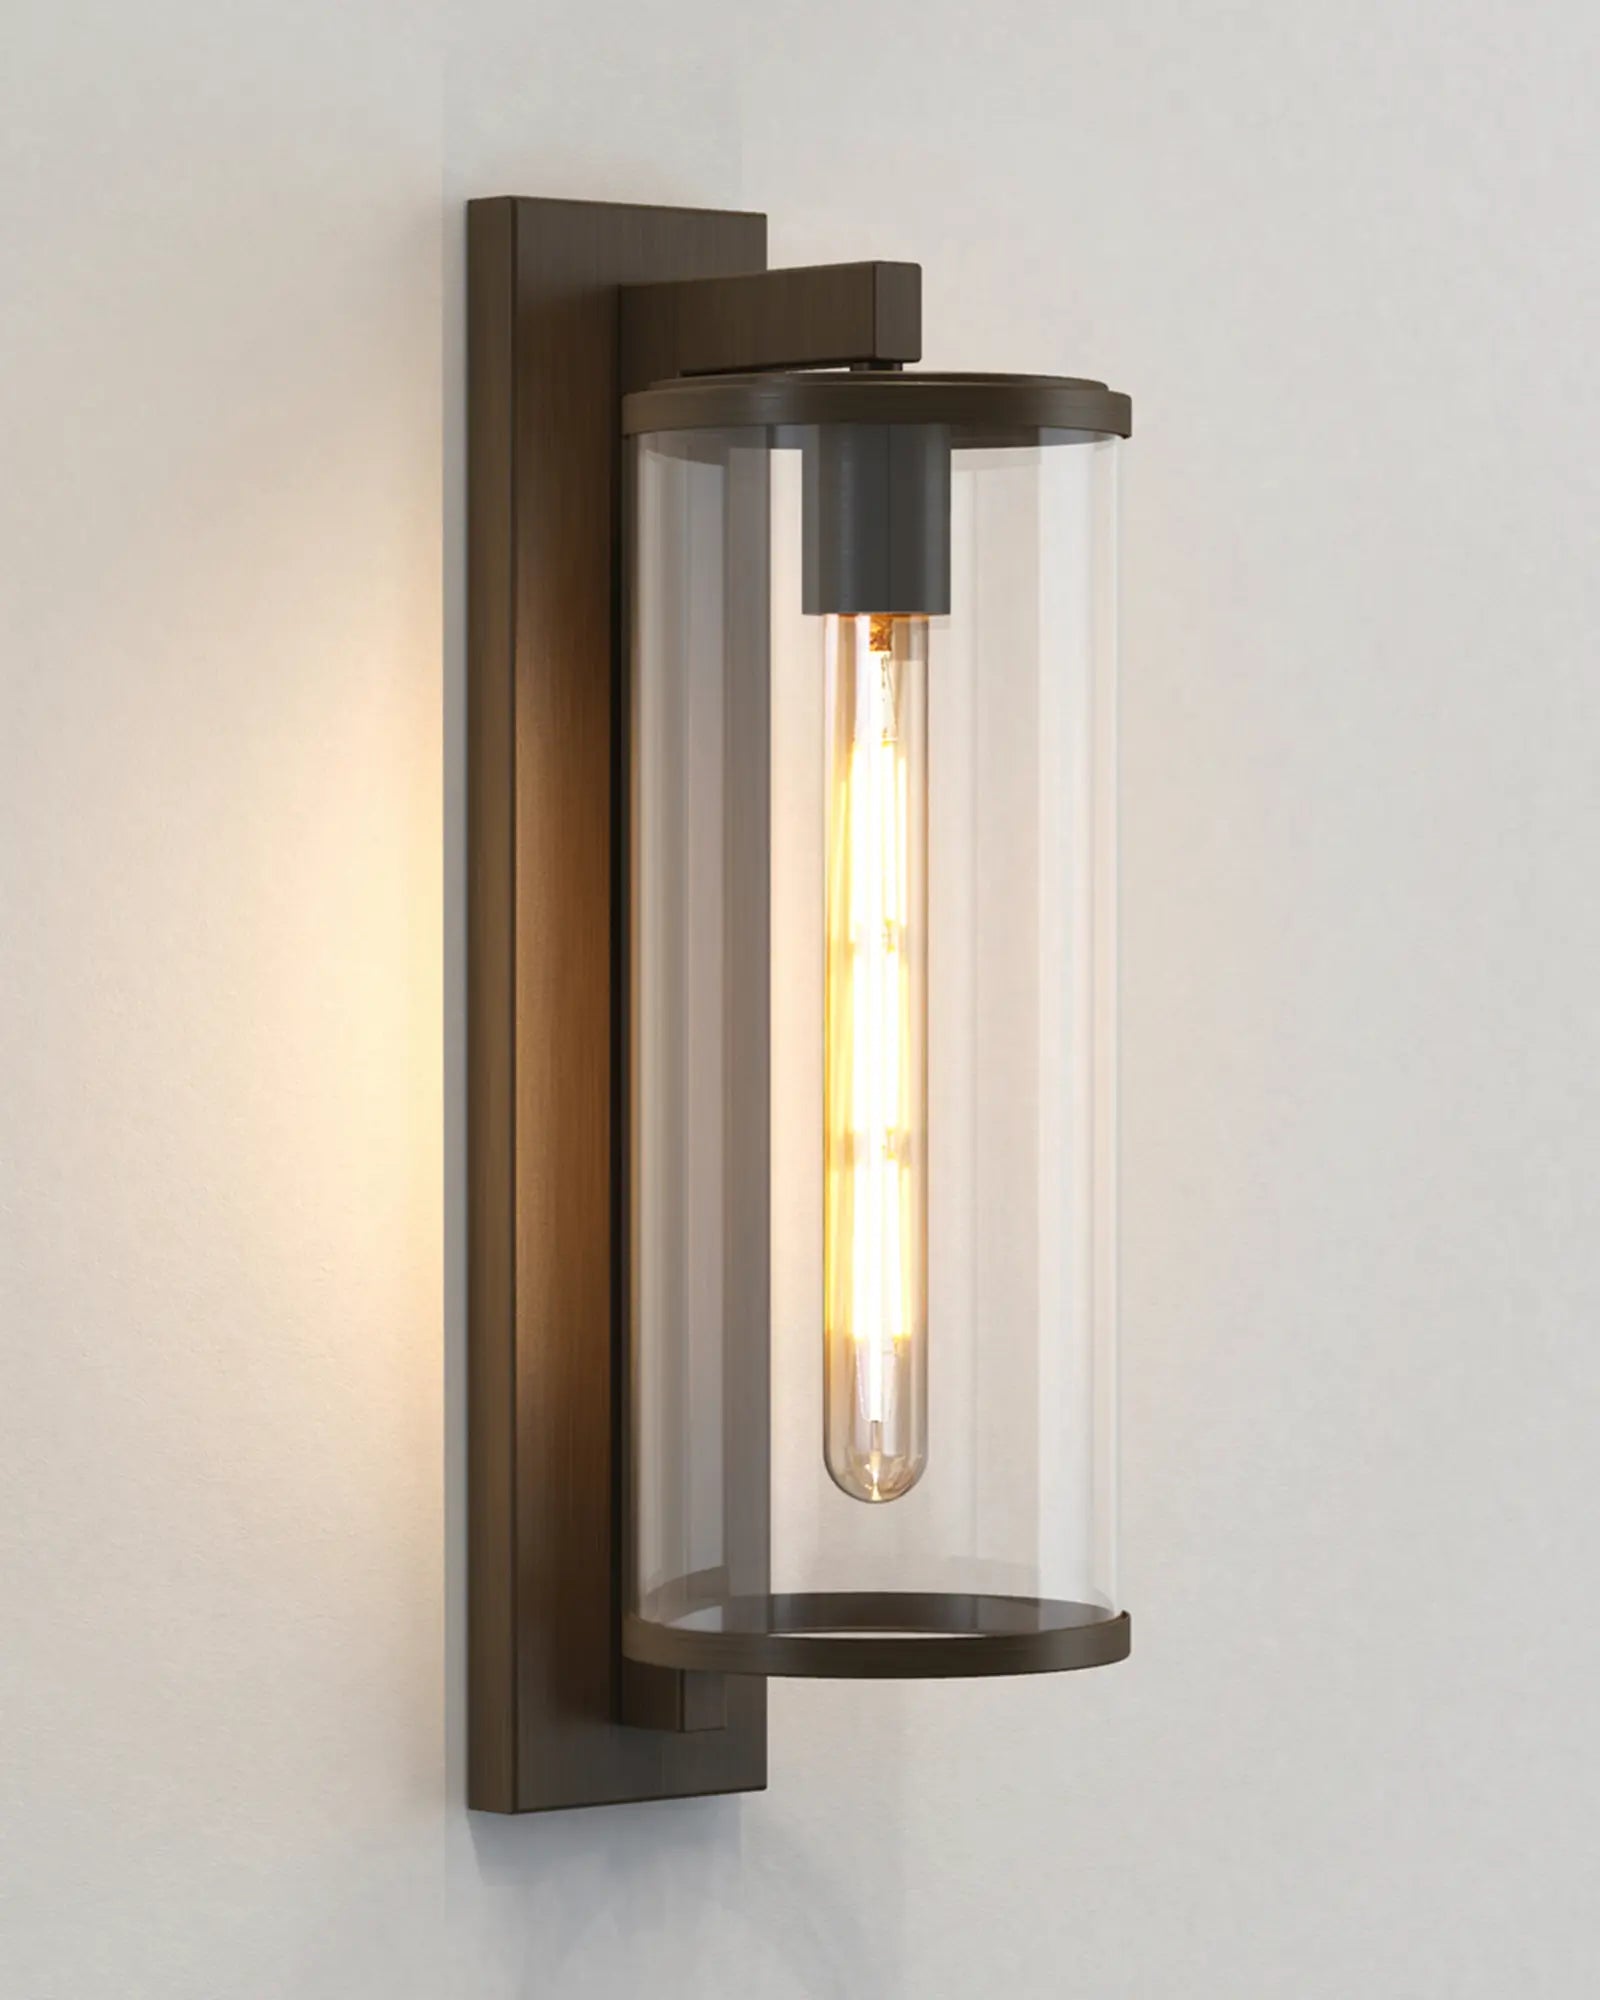 Pimlico Outdoor lantern style metal and glass wall light bronze 500